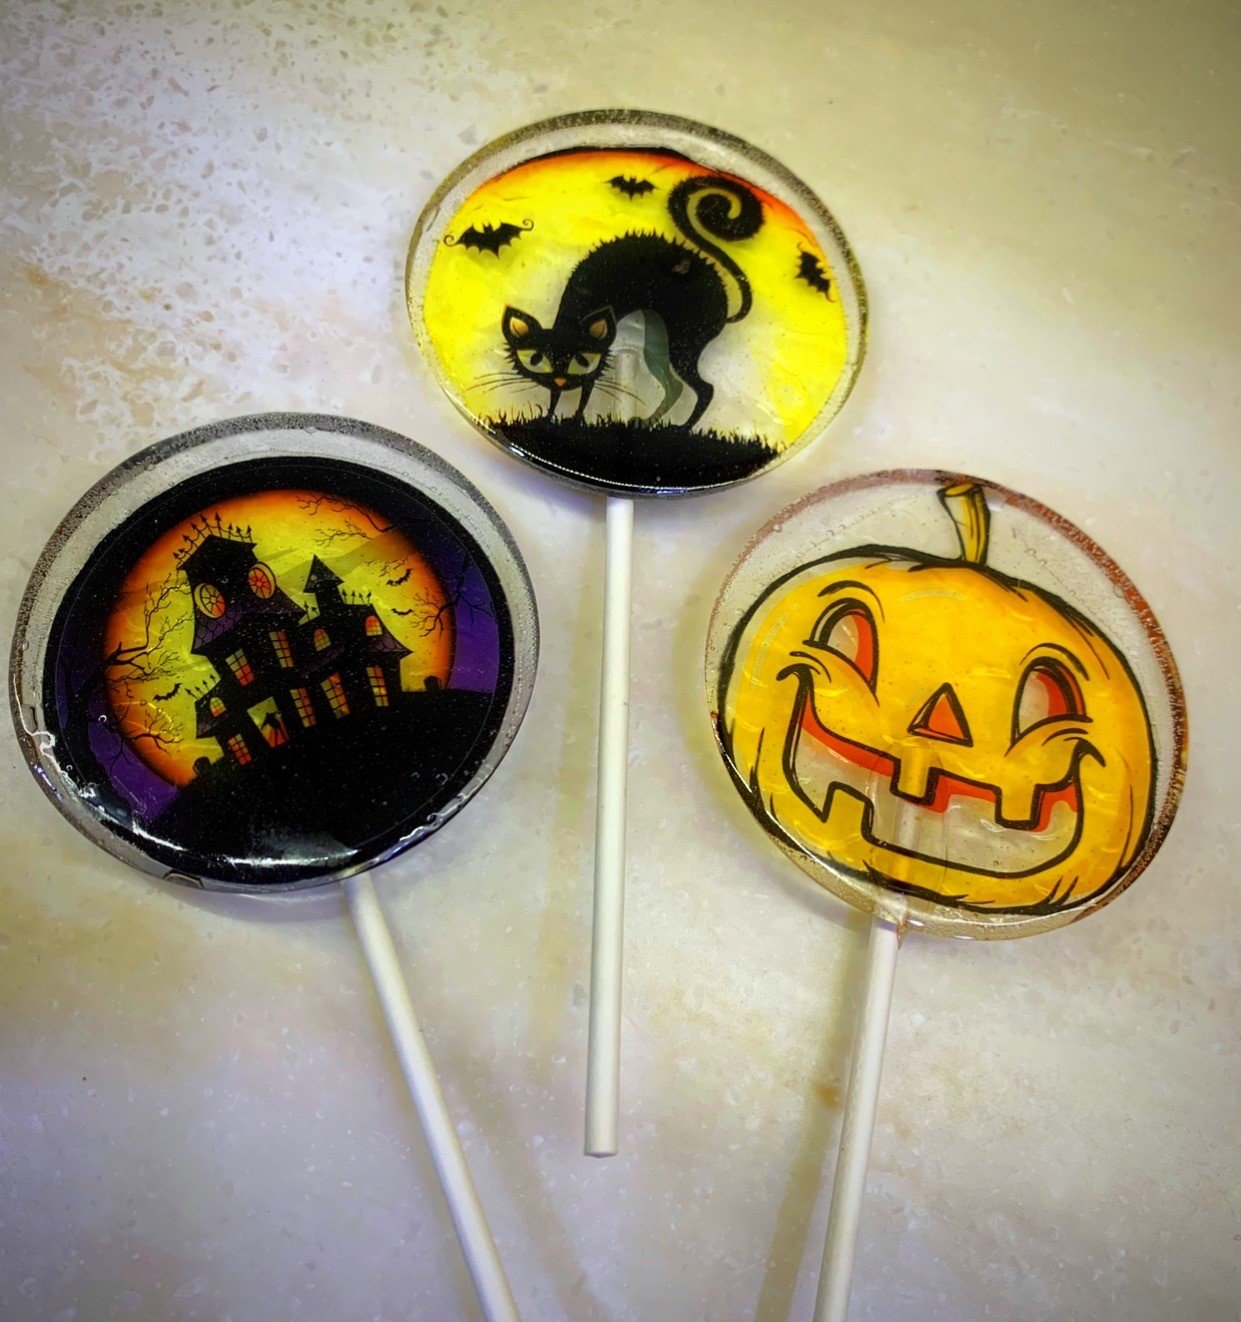 The completed Halloween lollipops.